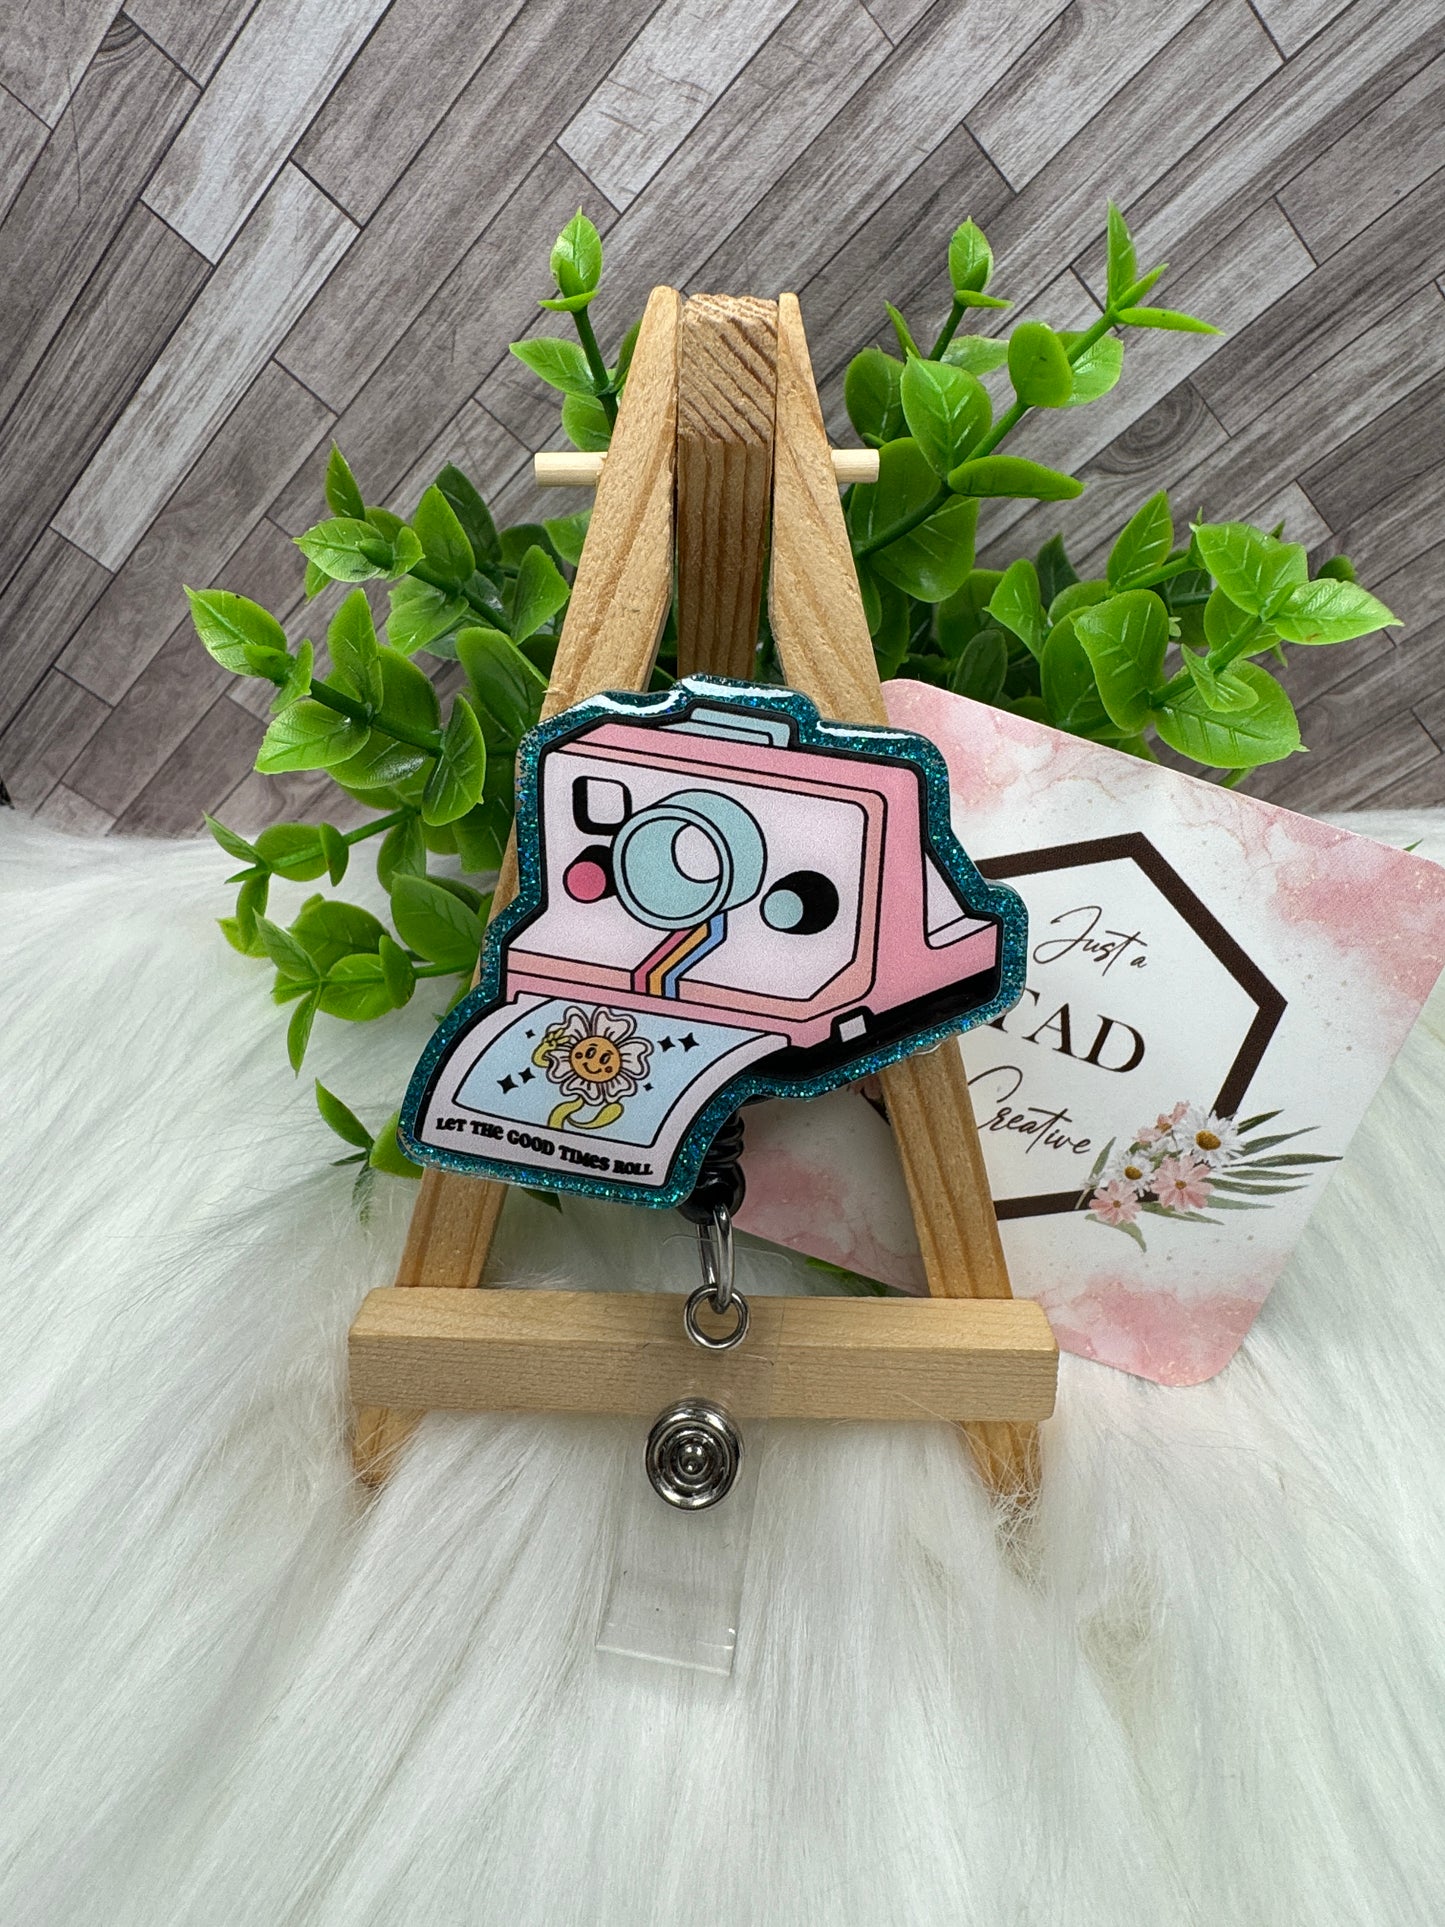 Let the Good Times Roll Instant Camera Interchangeable Badge Topper